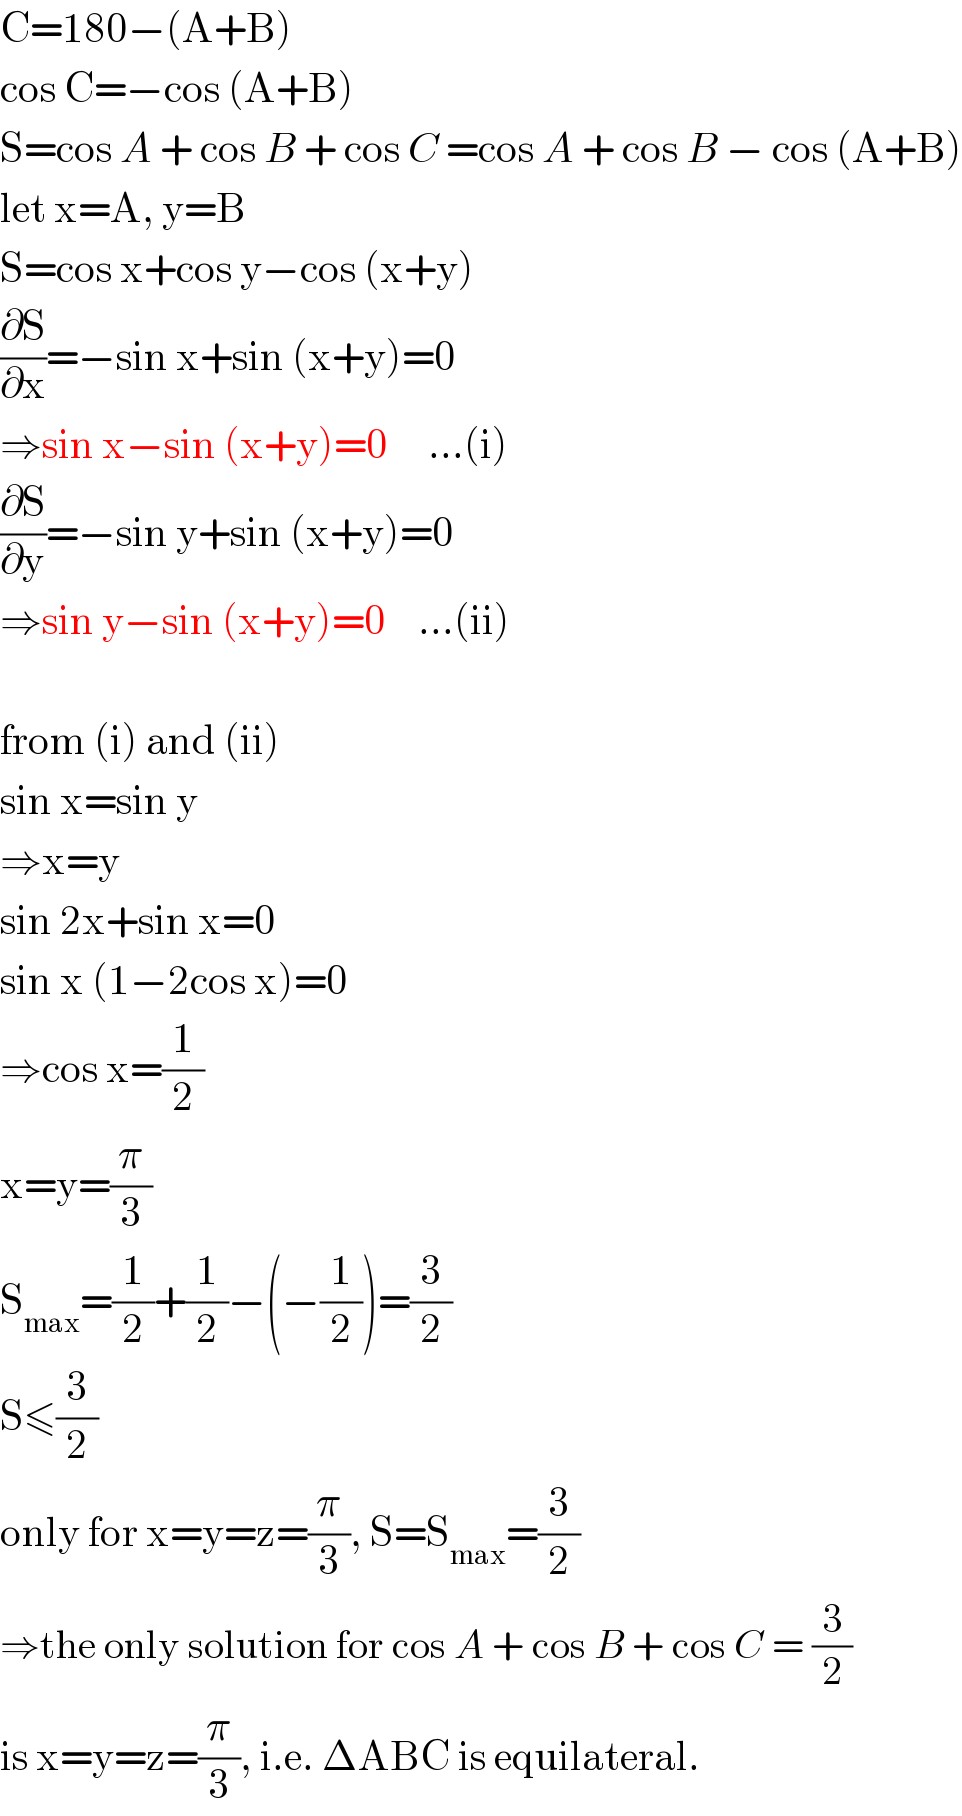 C=180−(A+B)  cos C=−cos (A+B)  S=cos A + cos B + cos C =cos A + cos B − cos (A+B)  let x=A, y=B  S=cos x+cos y−cos (x+y)  (∂S/∂x)=−sin x+sin (x+y)=0  ⇒sin x−sin (x+y)=0     ...(i)  (∂S/∂y)=−sin y+sin (x+y)=0  ⇒sin y−sin (x+y)=0    ...(ii)    from (i) and (ii)  sin x=sin y  ⇒x=y  sin 2x+sin x=0  sin x (1−2cos x)=0  ⇒cos x=(1/2)  x=y=(π/3)  S_(max) =(1/2)+(1/2)−(−(1/2))=(3/2)  S≤(3/2)  only for x=y=z=(π/3), S=S_(max) =(3/2)  ⇒the only solution for cos A + cos B + cos C = (3/2)  is x=y=z=(π/3), i.e. ΔABC is equilateral.  